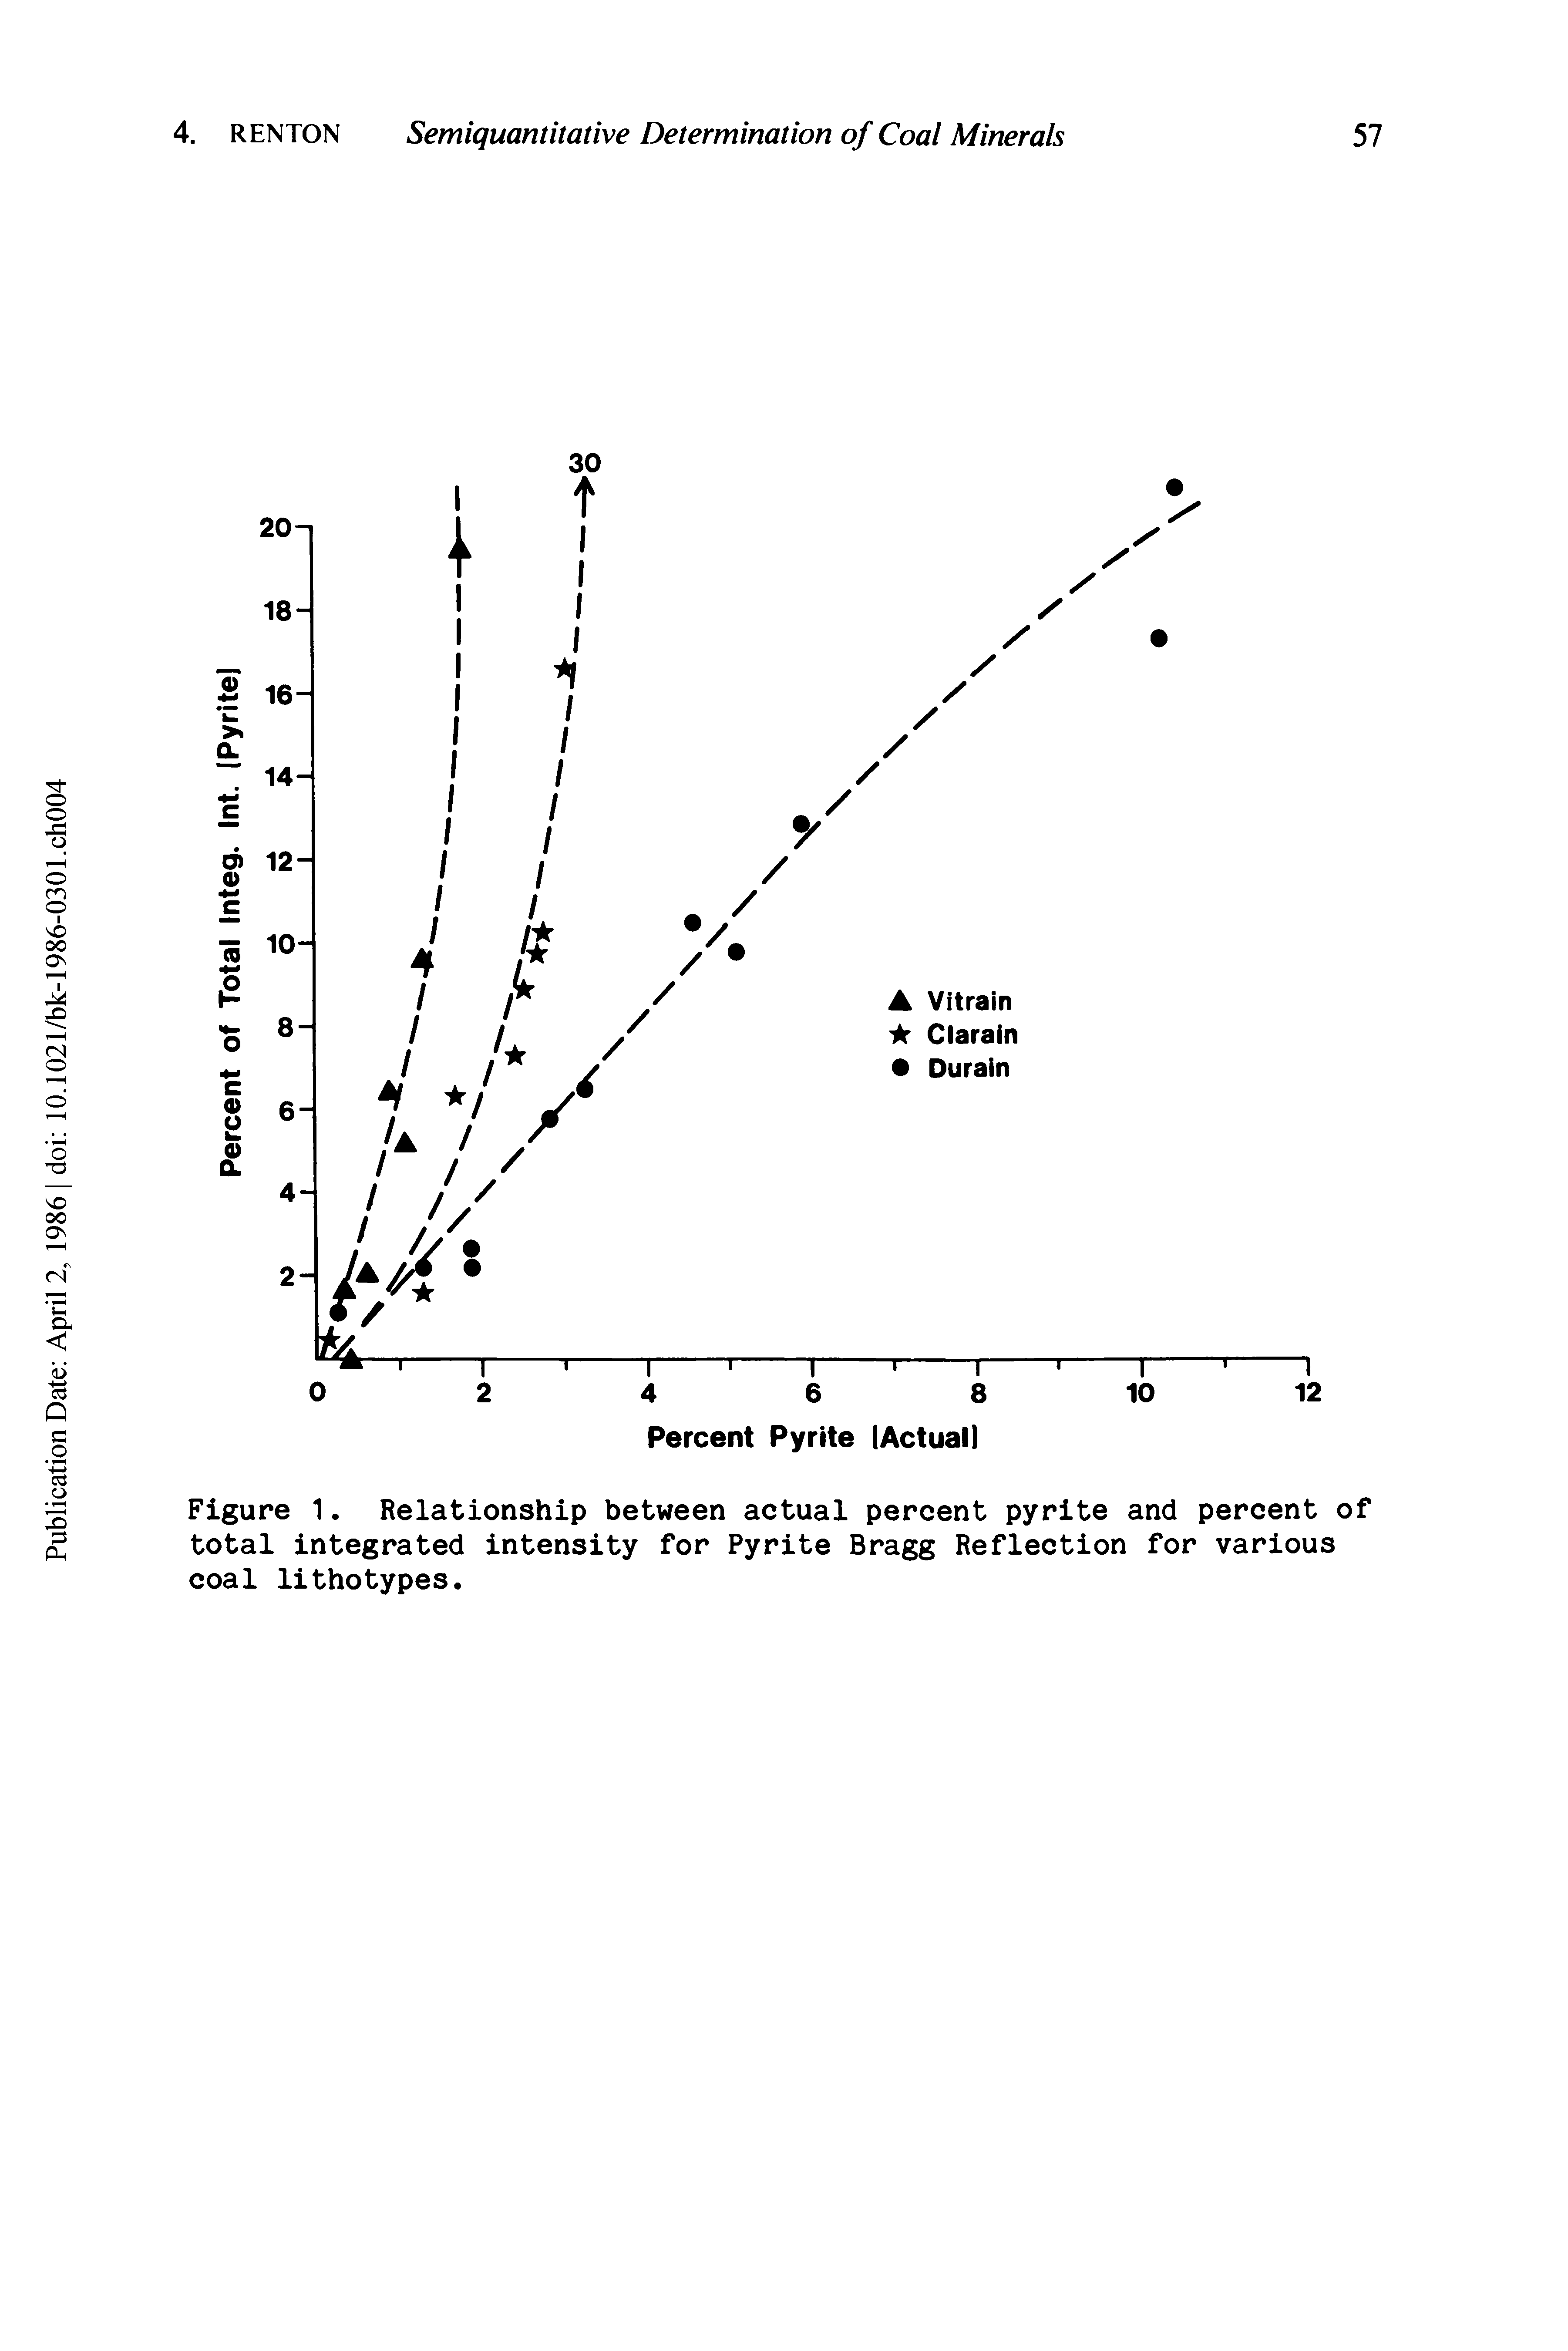 Figure 1. Relationship between actual percent pyrite and percent of total integrated intensity for Pyrite Bragg Reflection for various coal lithotypes.